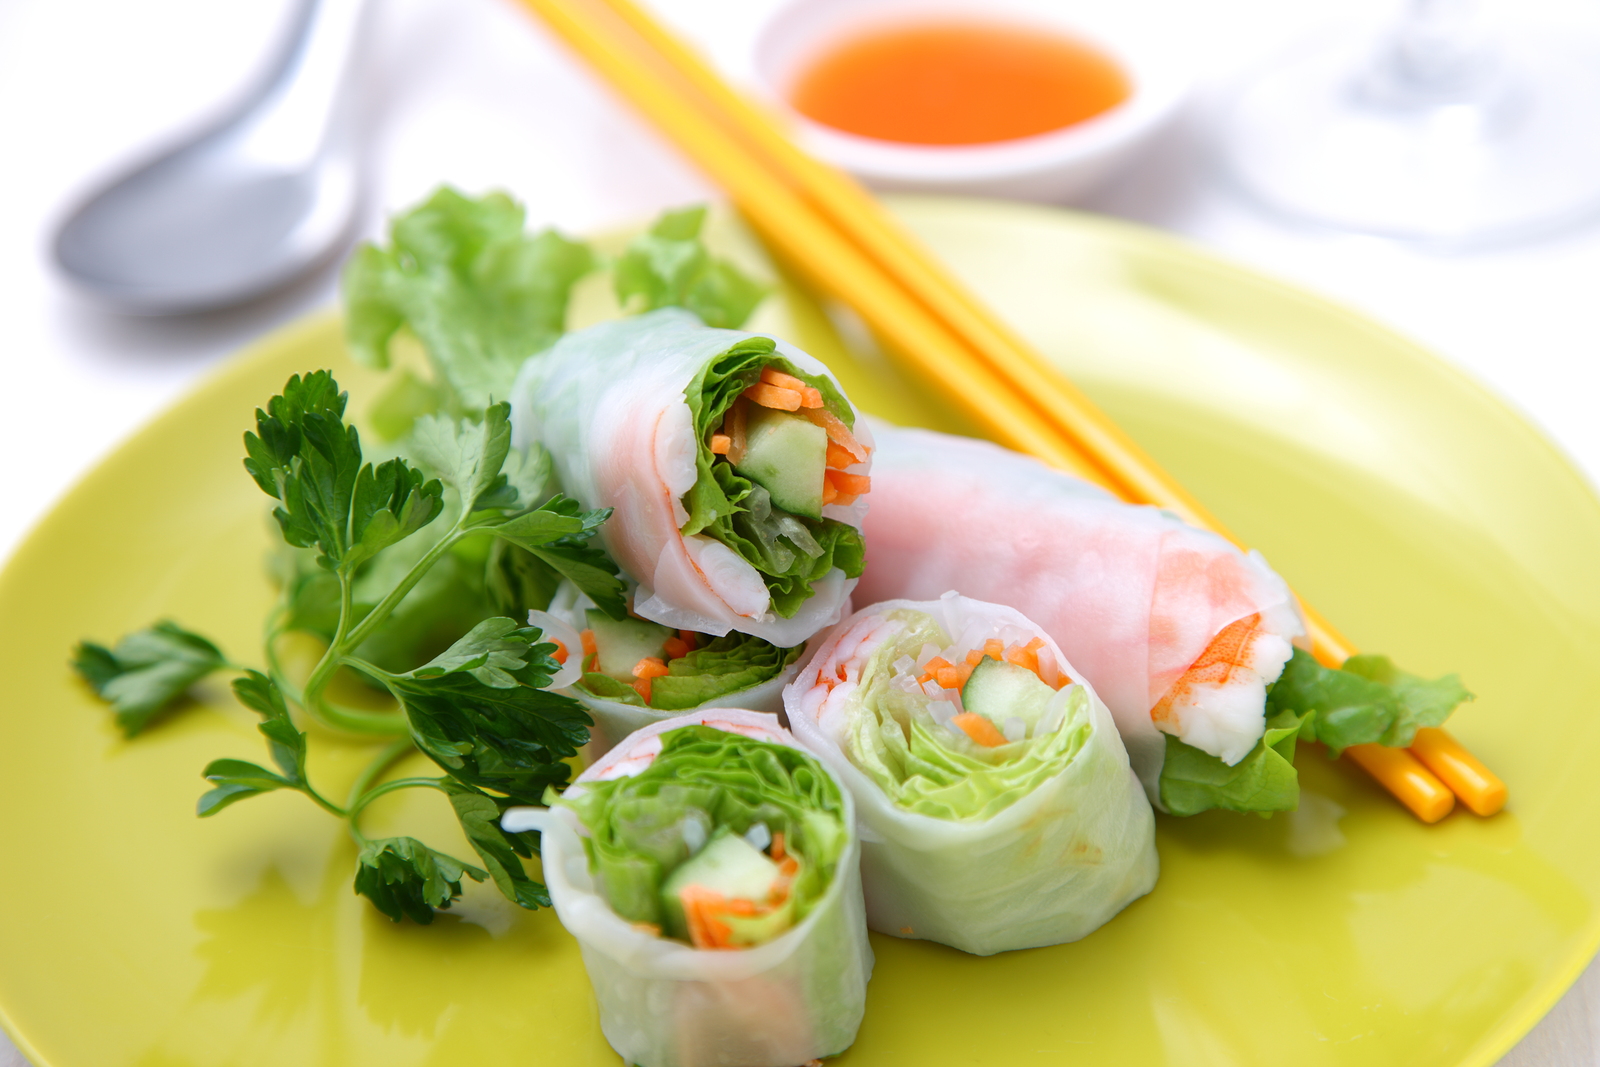 Vietnamese food - tasty and nutritious